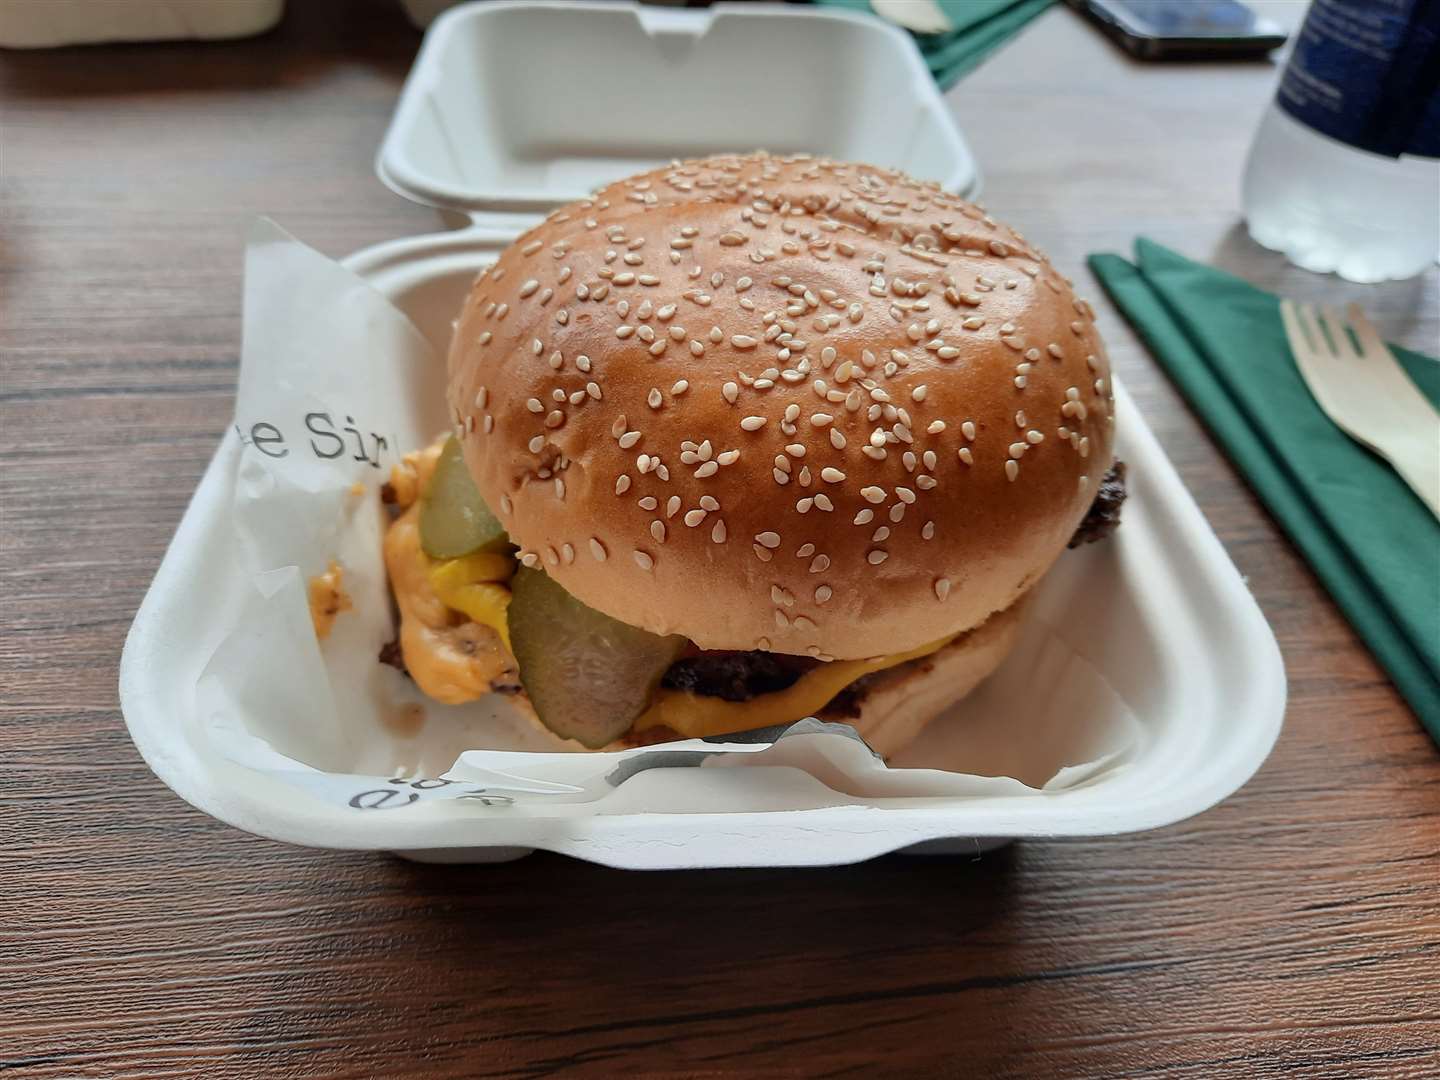 The "Mash" burger served to our reporter during his visit to Please Sir! in Broadstairs